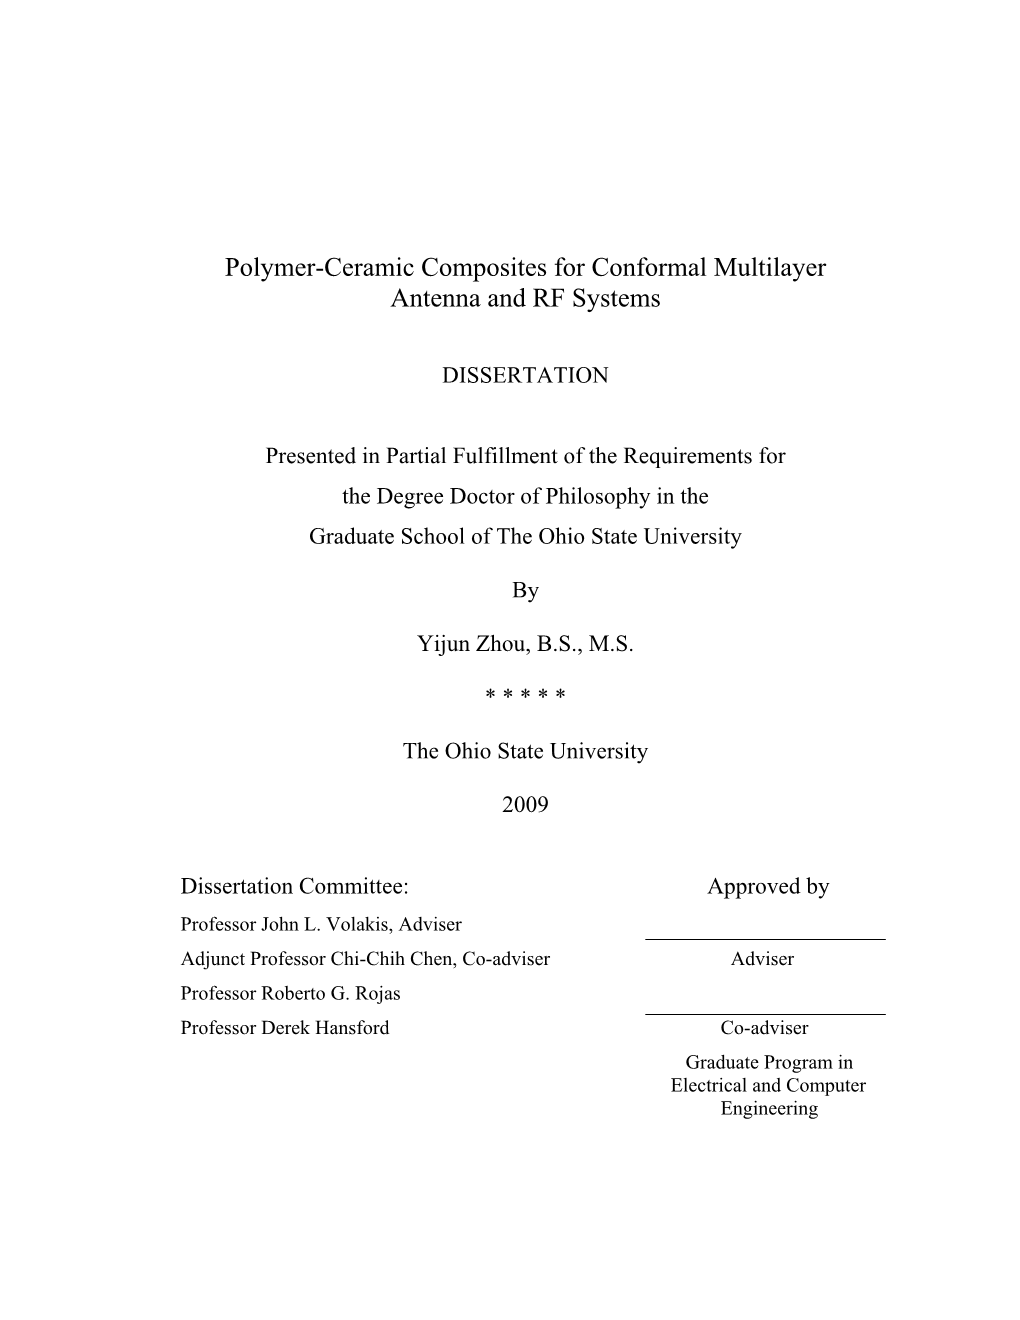 Polymer-Ceramic Composites for Conformal Multilayer Antenna and RF Systems